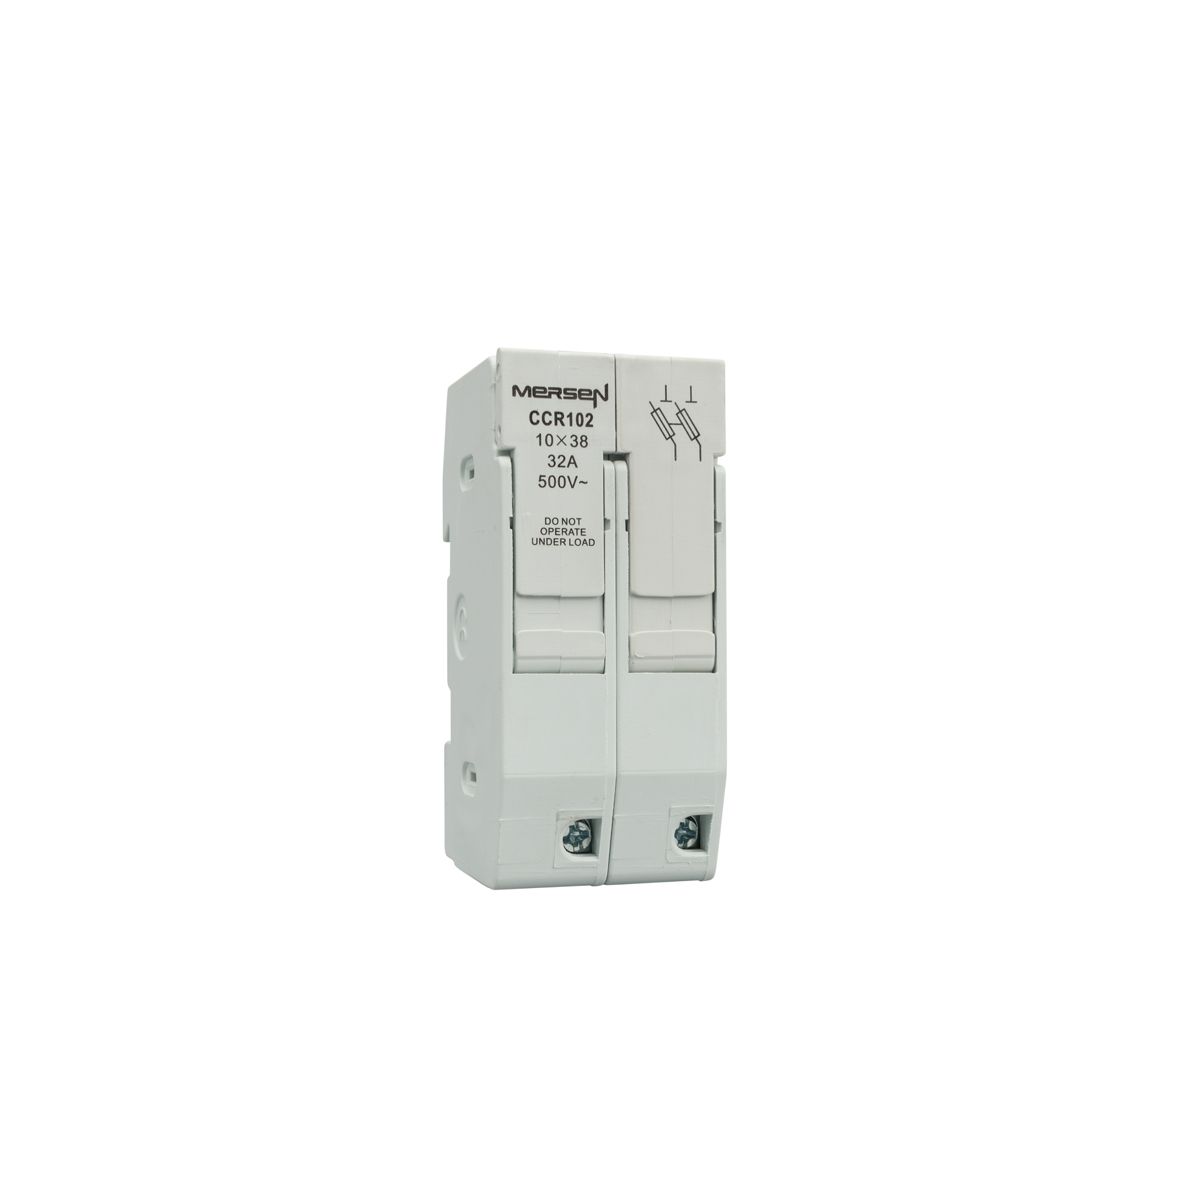 X233723 - compact fuse holder, IEC, 2P, 10x38, DIN rail mounting~